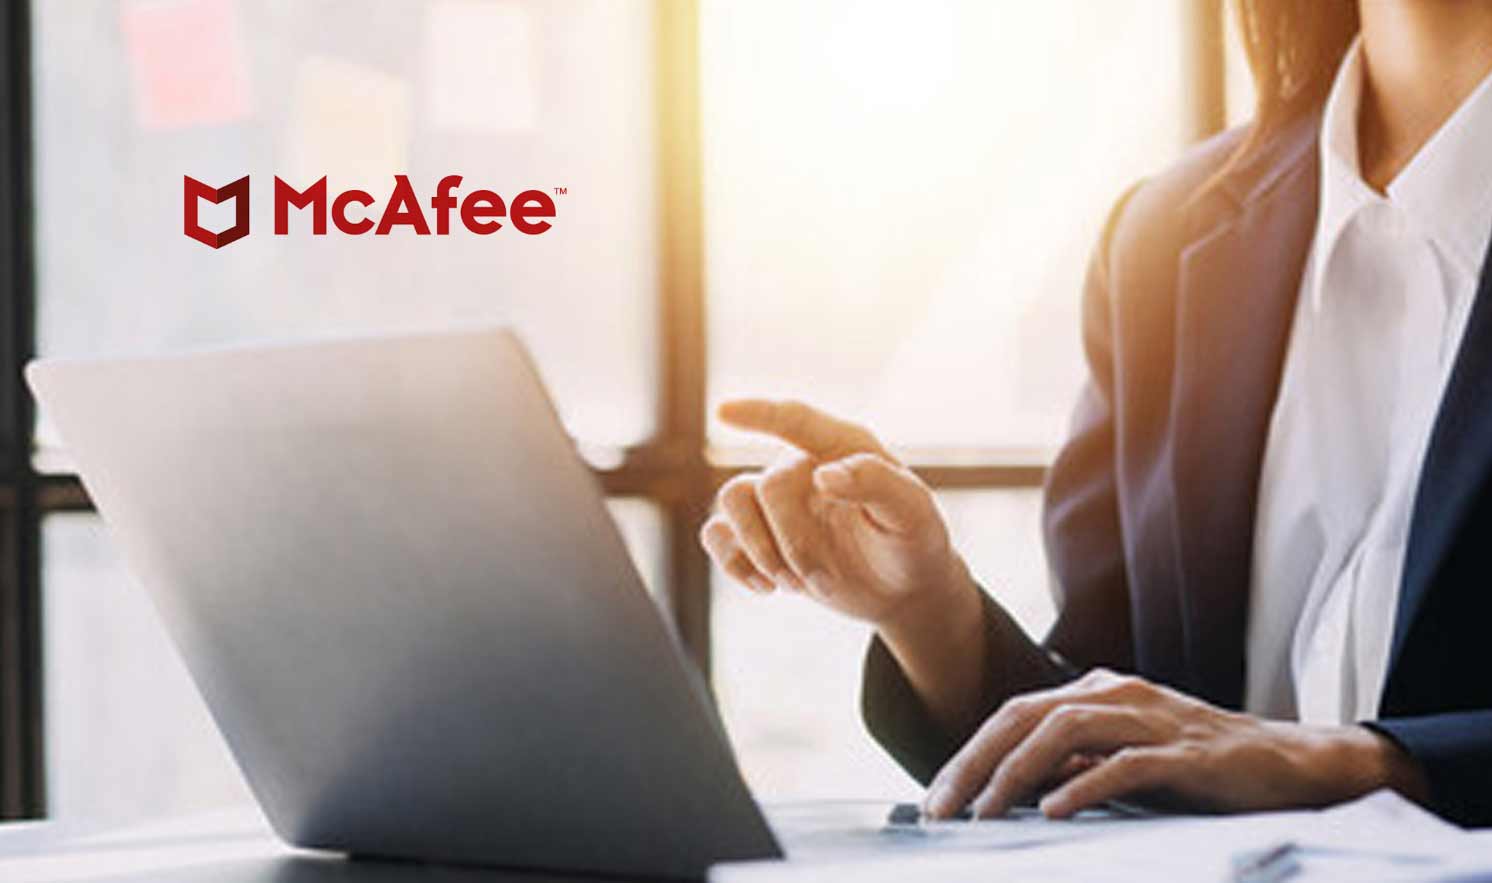 McAfee unveils AI project to protect users from deepfake scams